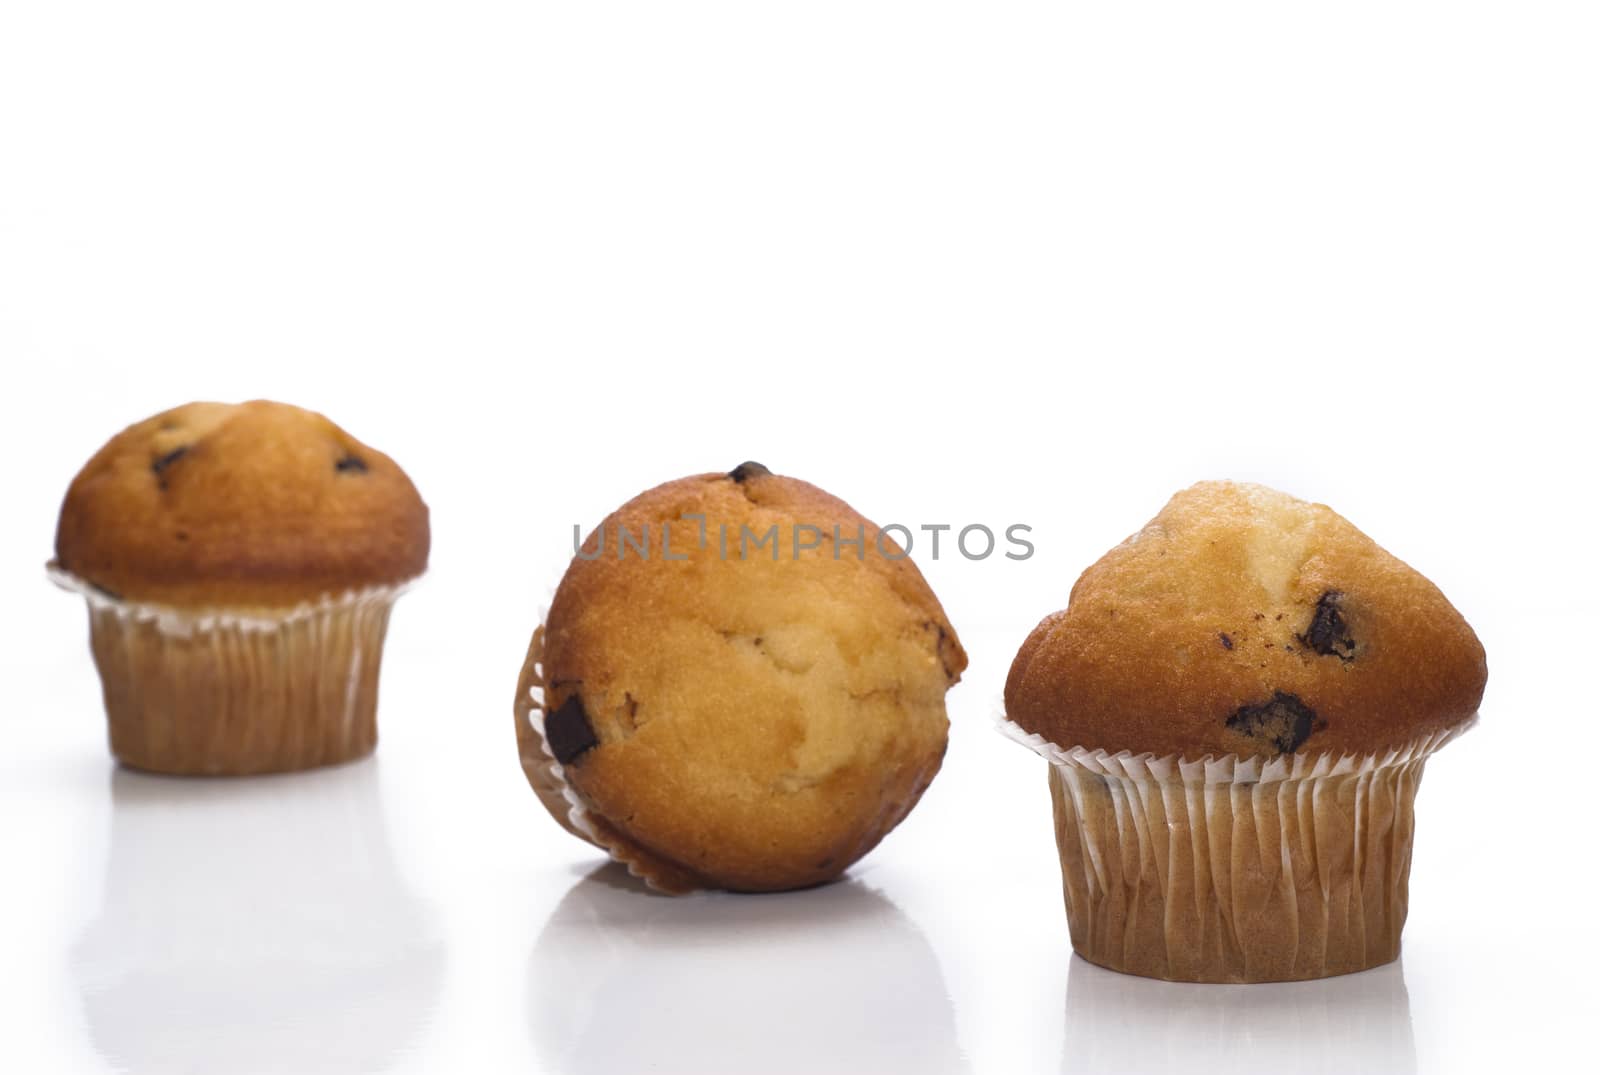 sweet muffins with chocolate drops isolated on a white background